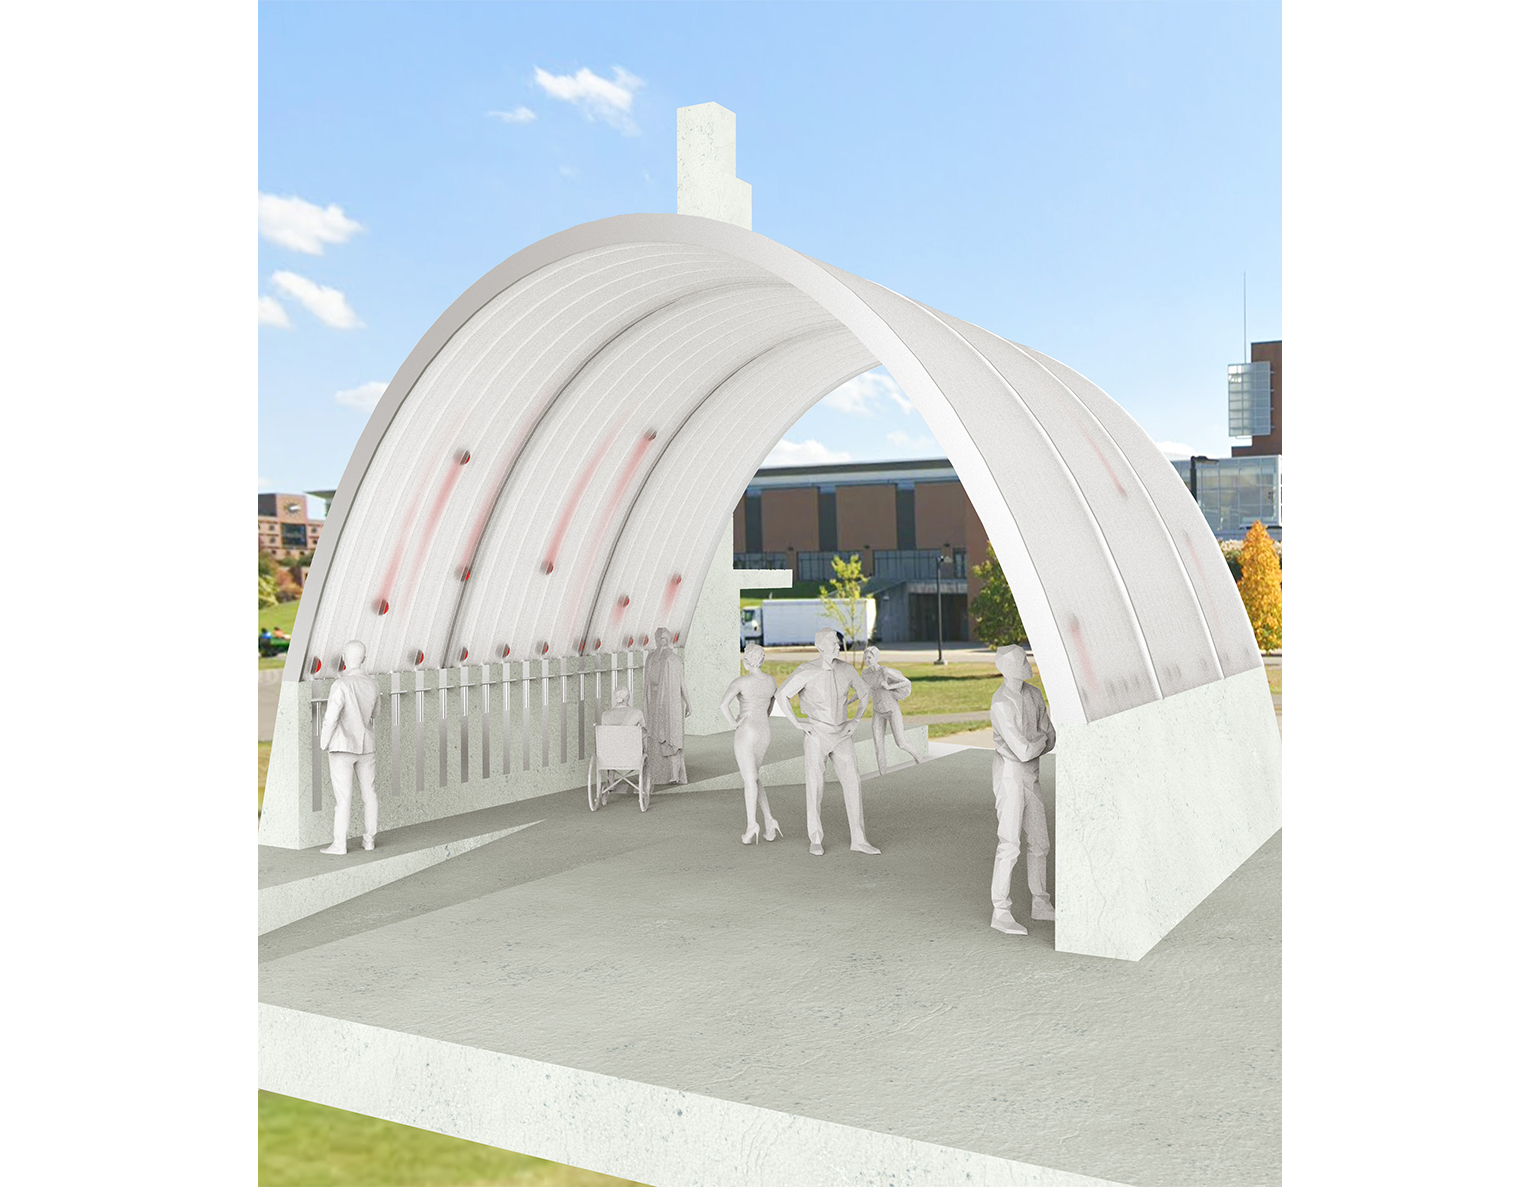 A digital illustration of an arched structure with human figures in an urban park setting.